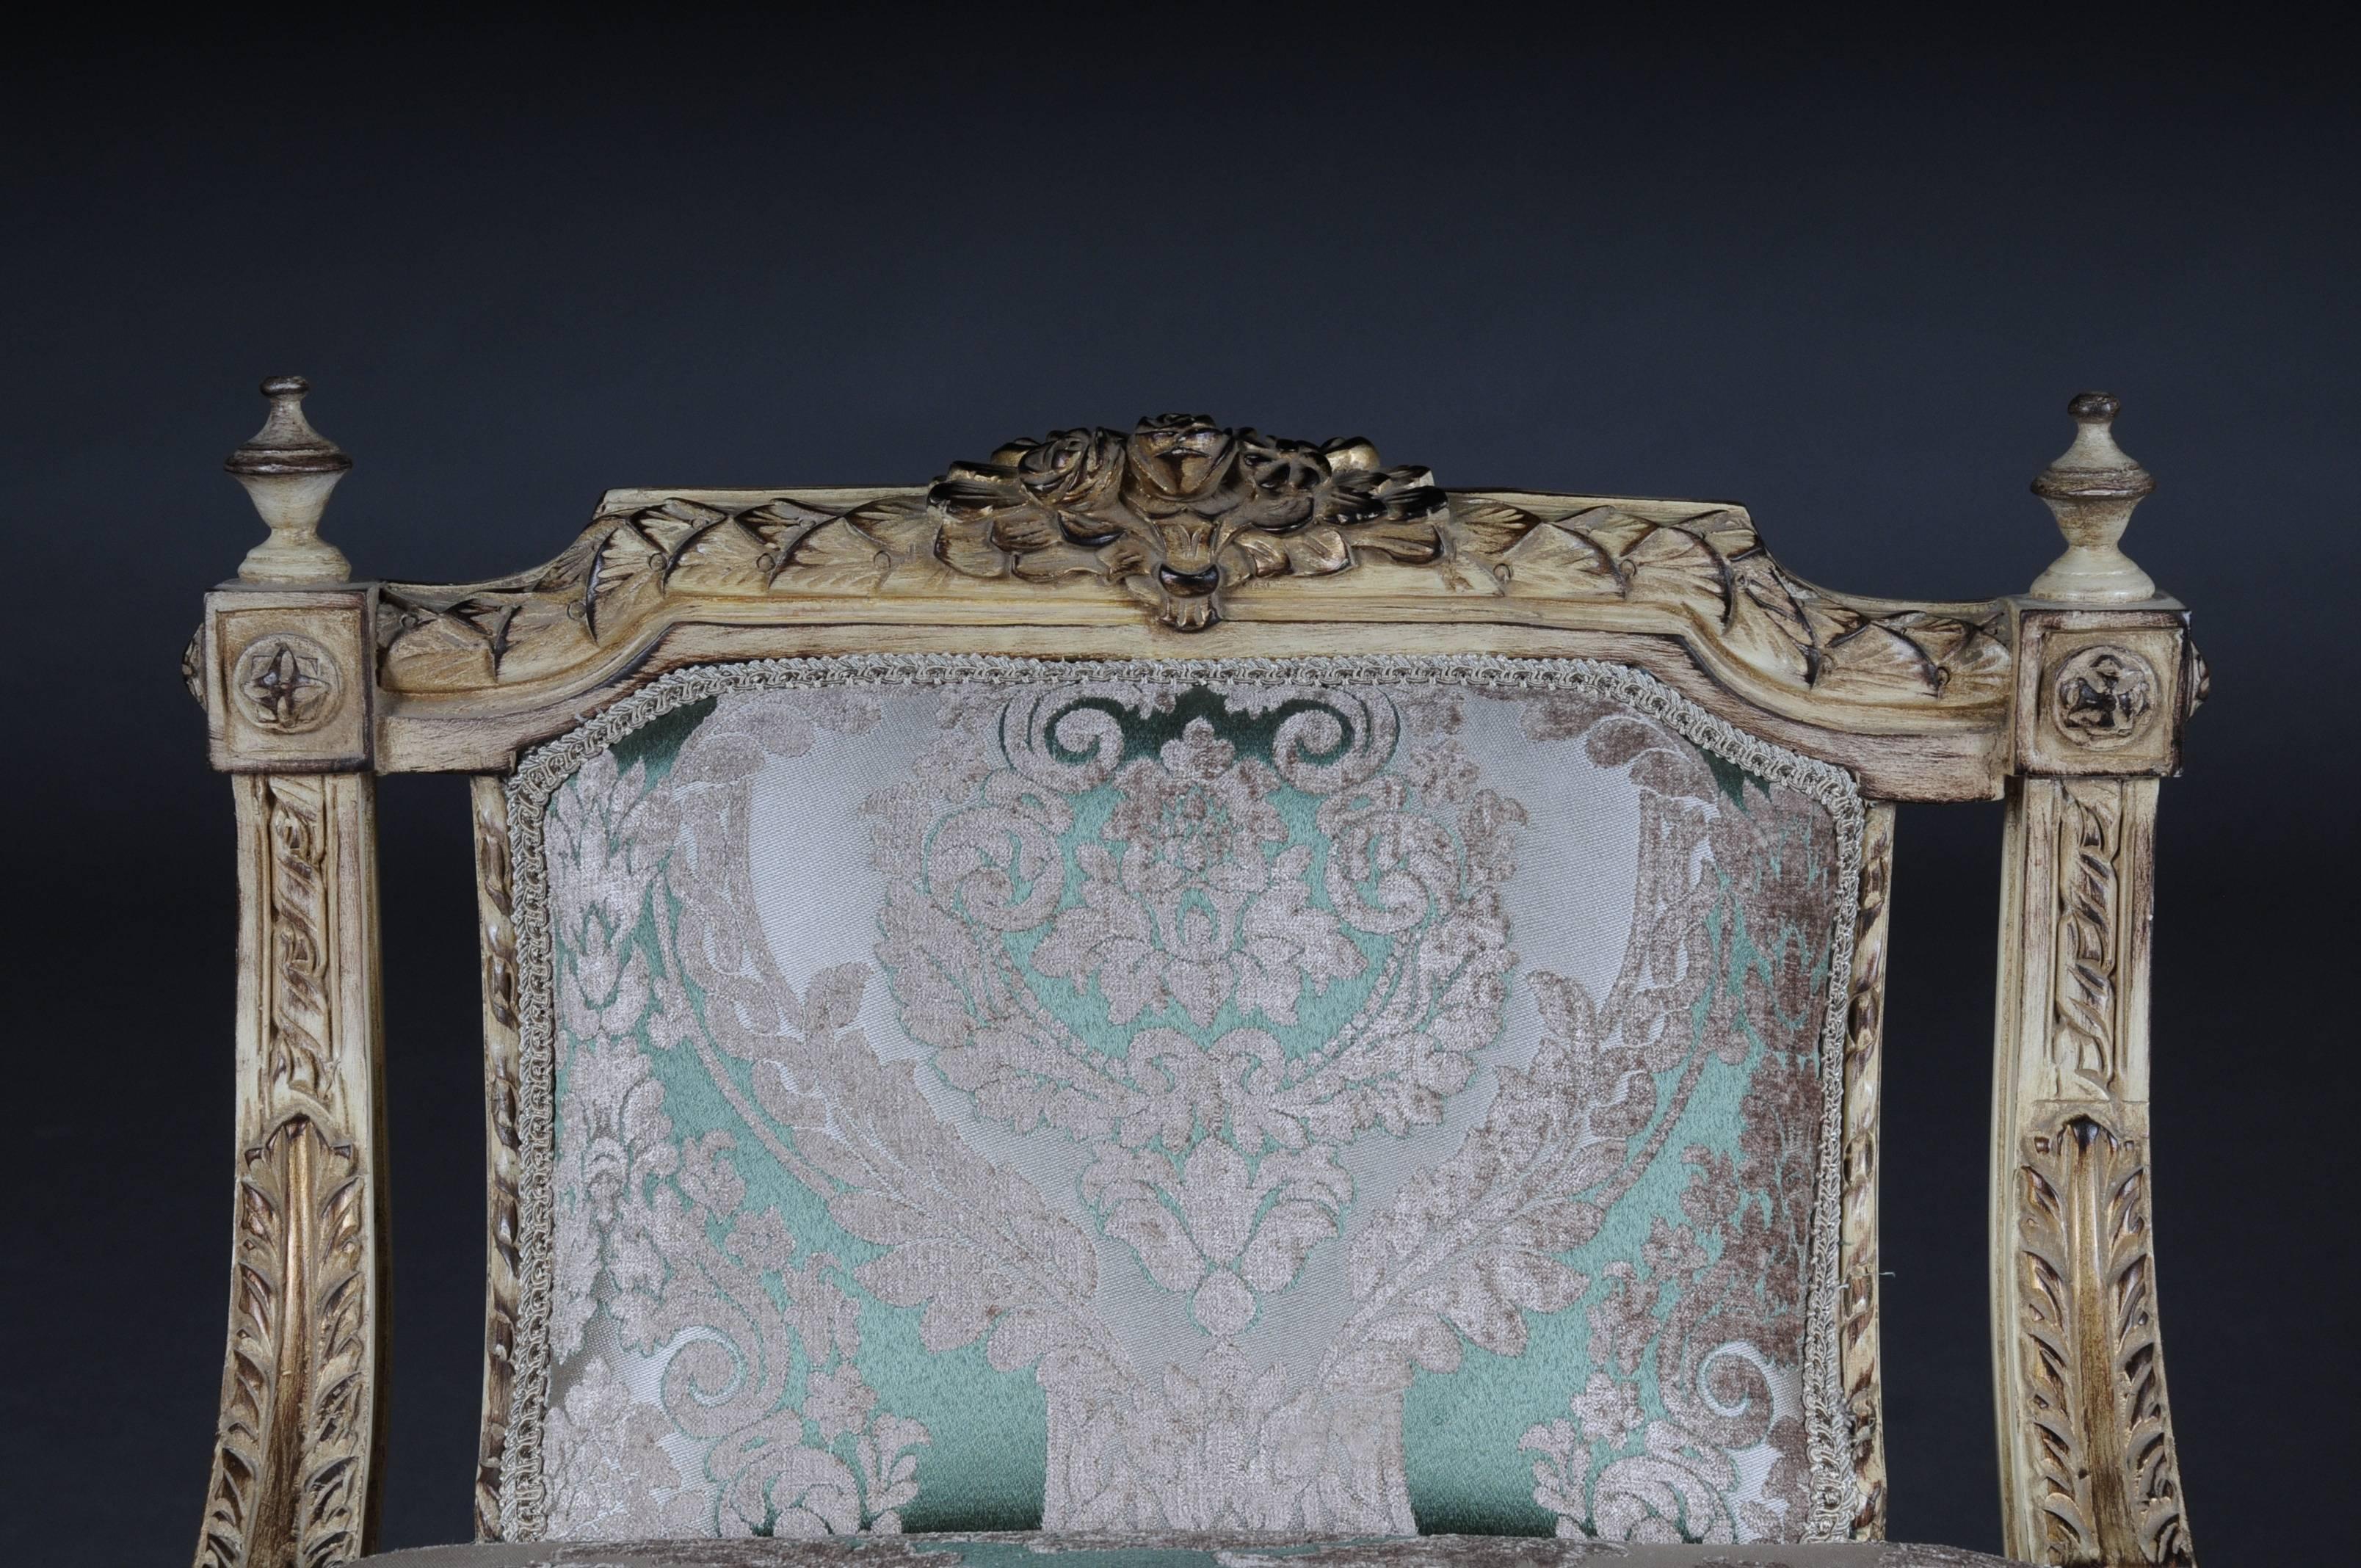 Upholstery Noble French Bench, Gondola in Louis Seize xvi